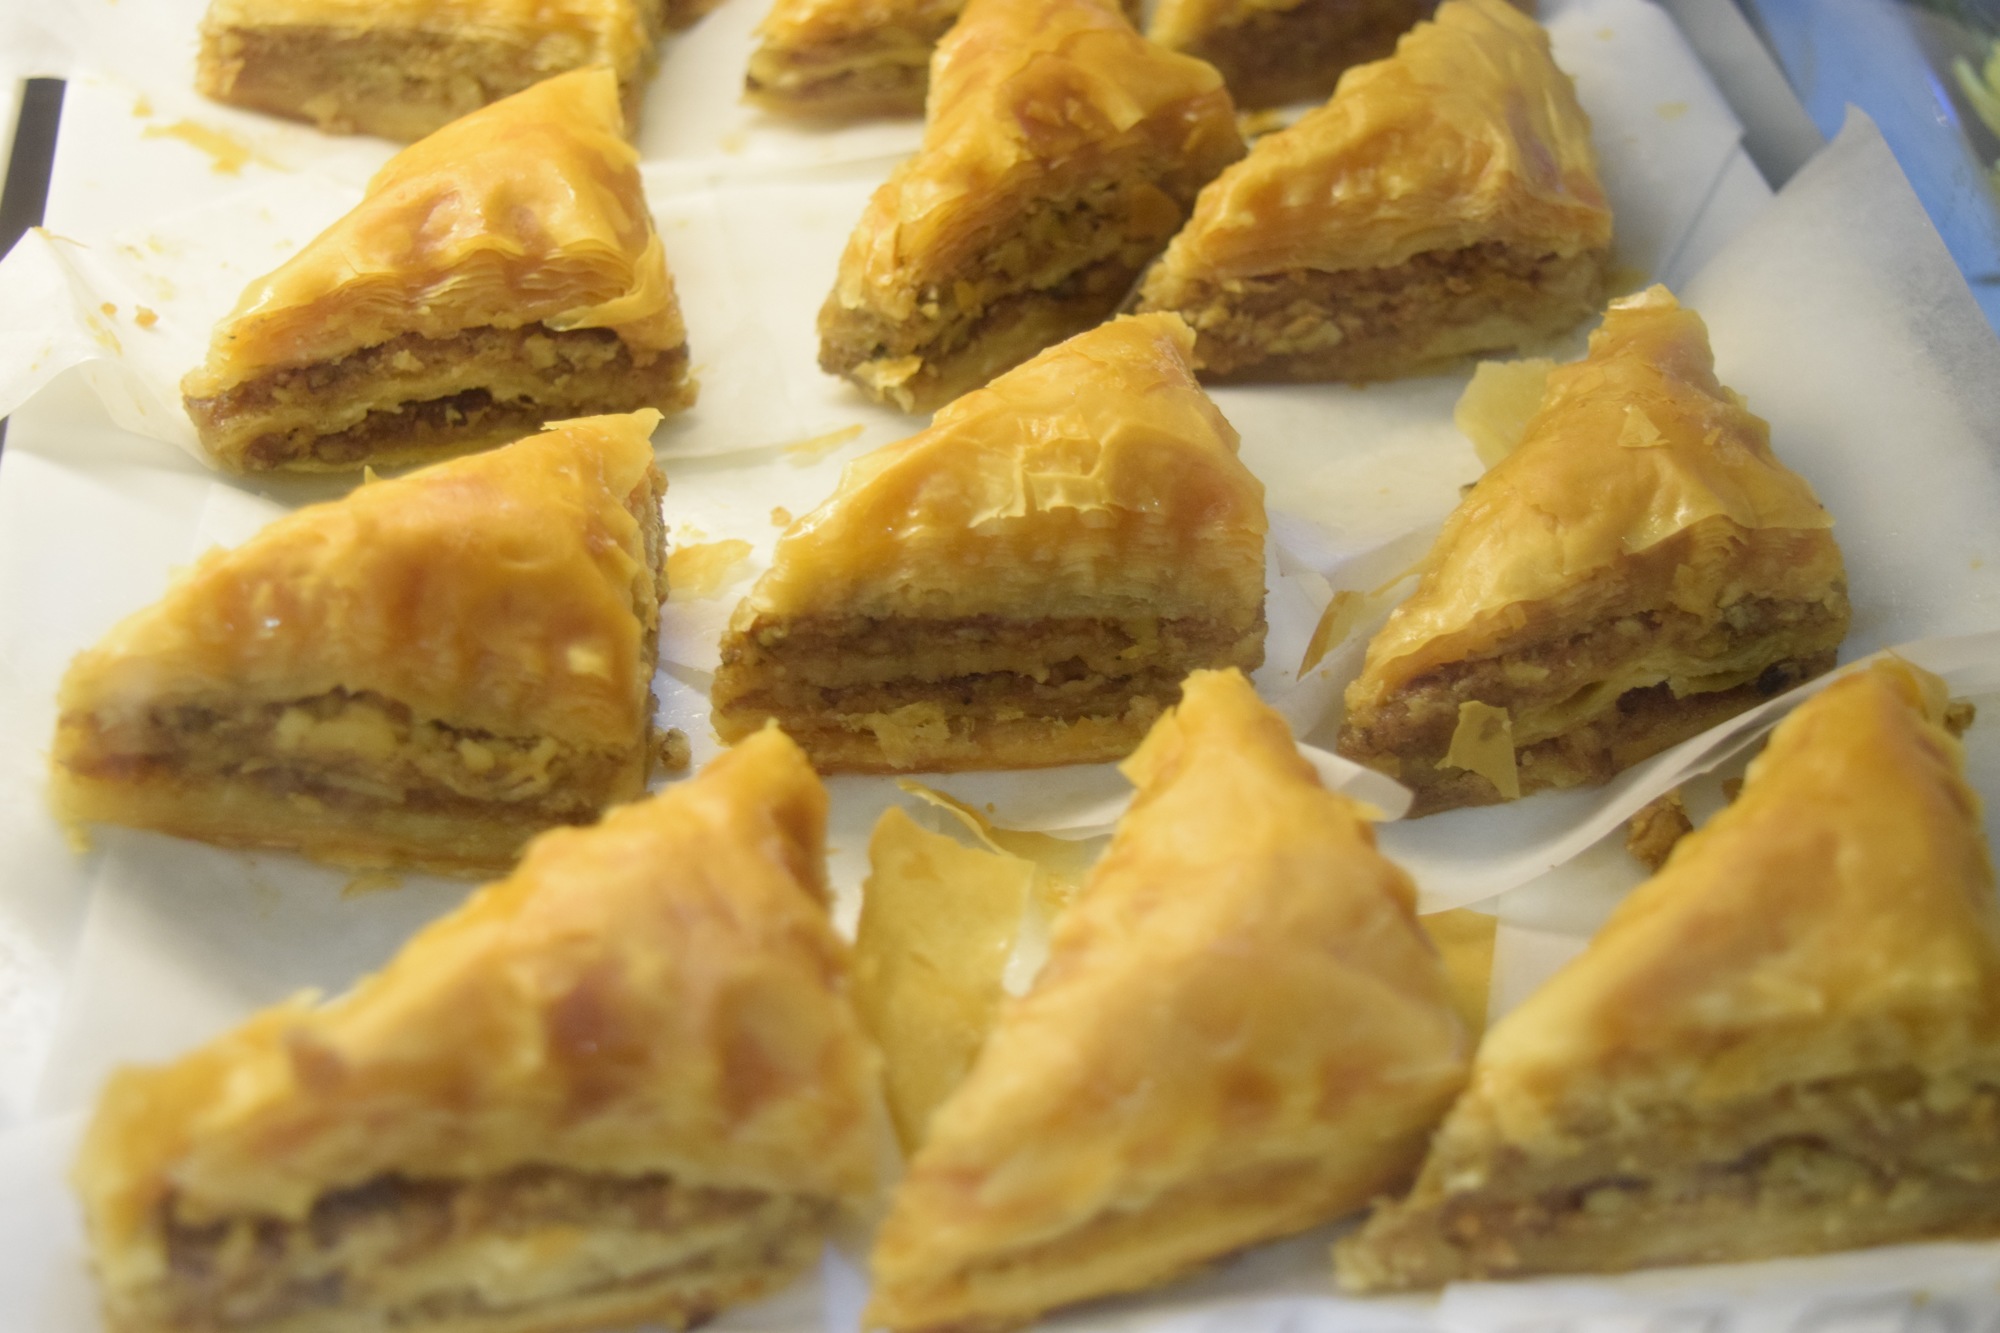 Baklava is among the Greek treats you can try at Little Greek Fresh Grill.